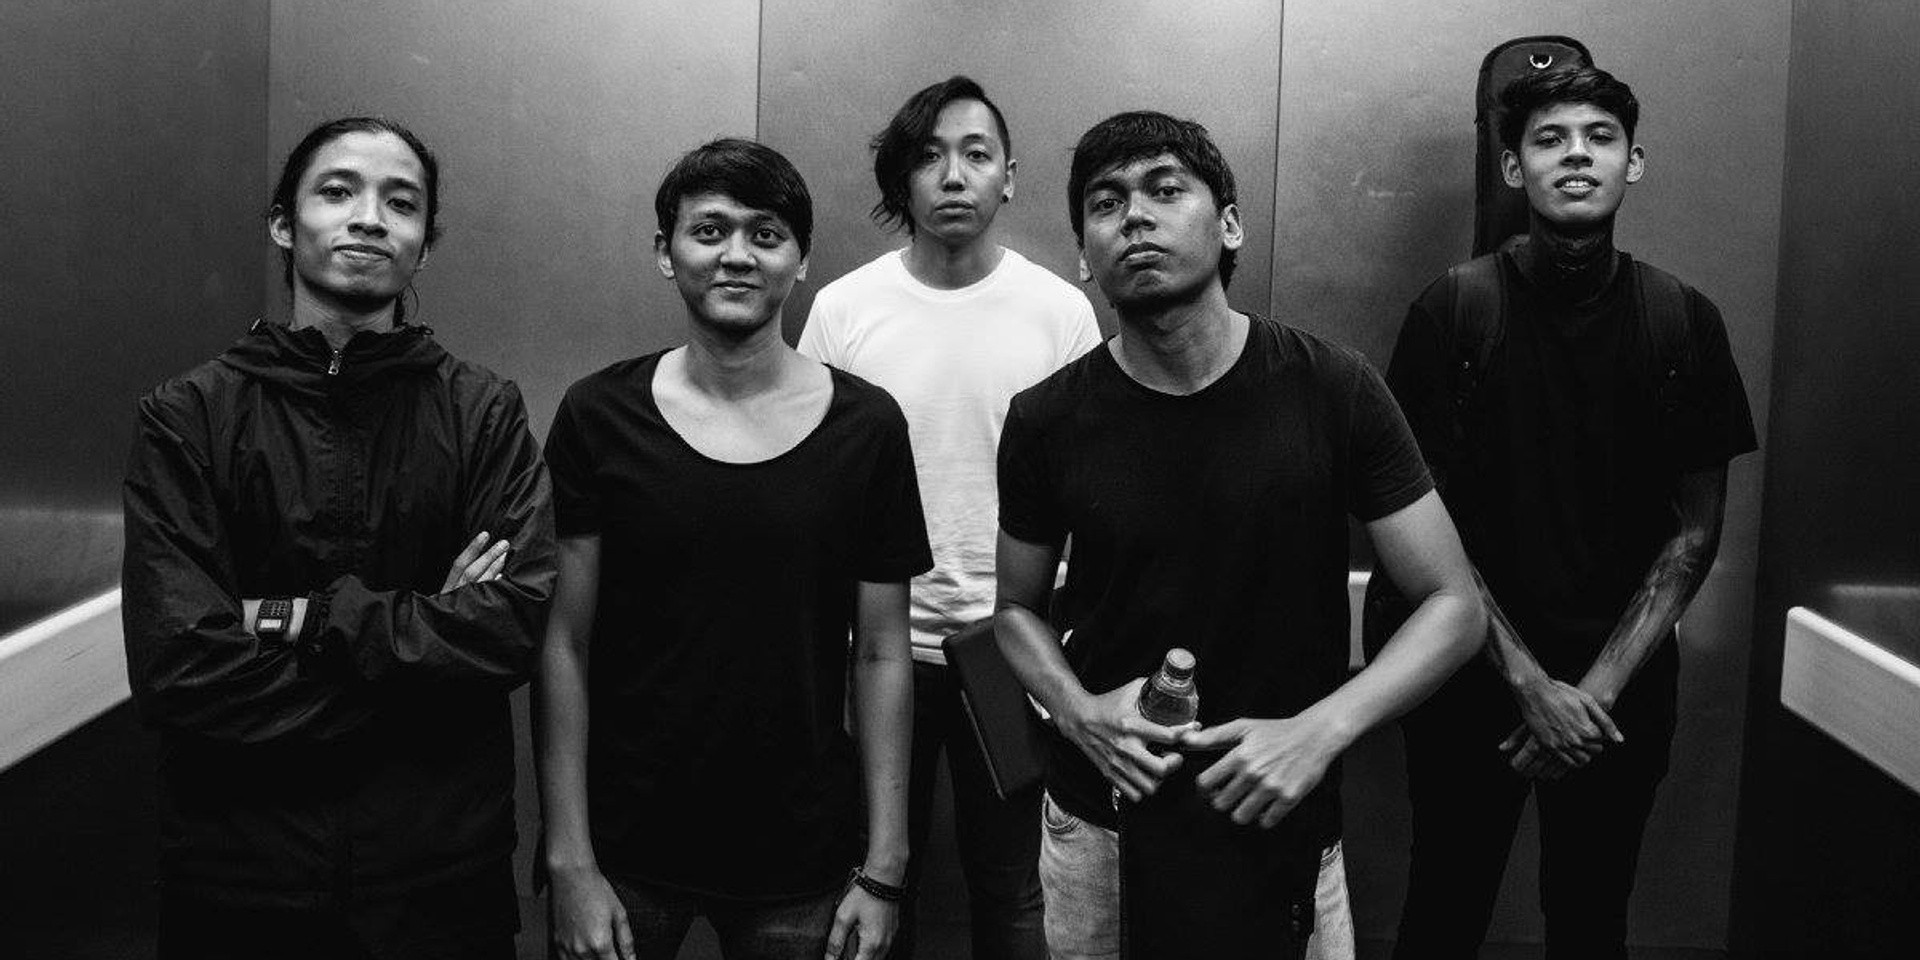 The final Bandwagon Nights of 2016 lives up to Hard Rock Cafe's name with Tacit Aria & The Psalms